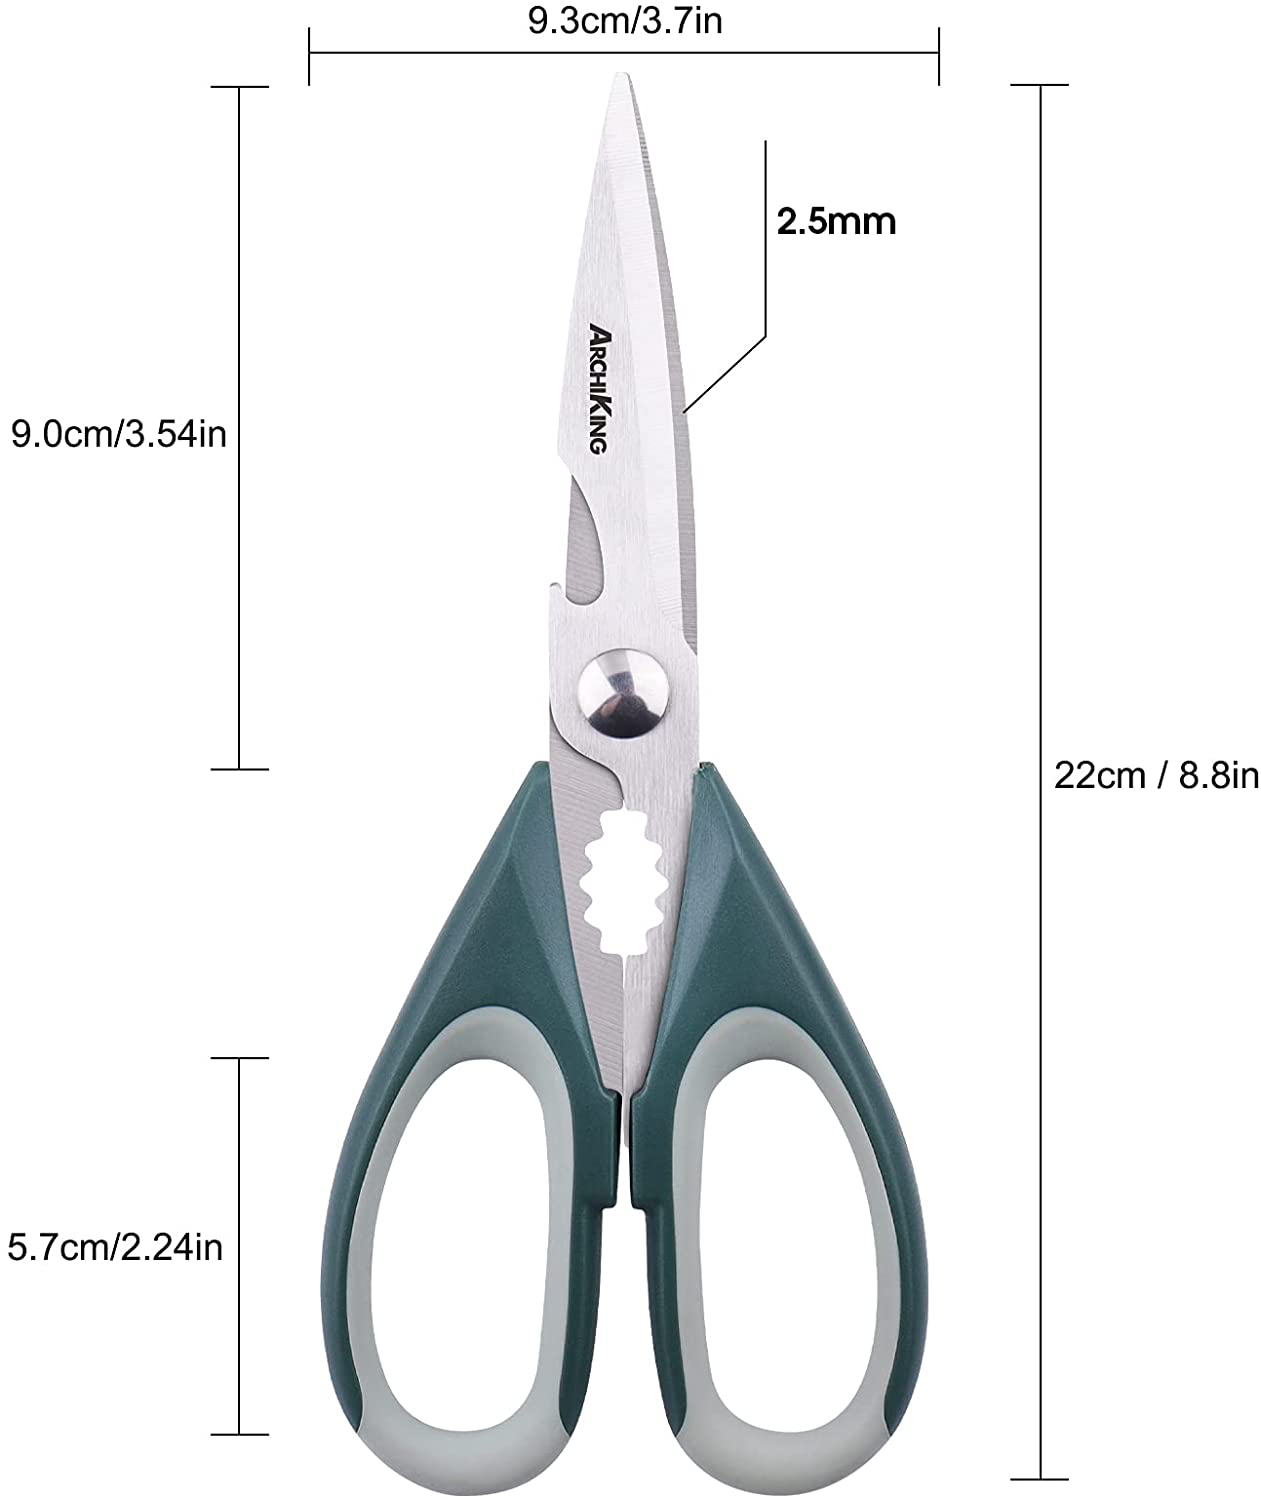 Kitchen Shears, ARCHIKING All-purpose Kitchen Scissors, Heavy Duty Sharp Cooking Shears Dishwasher Safe, Professional Stainless Steel Scissors for Food Meat Chicken Poultry Fish Vegetable